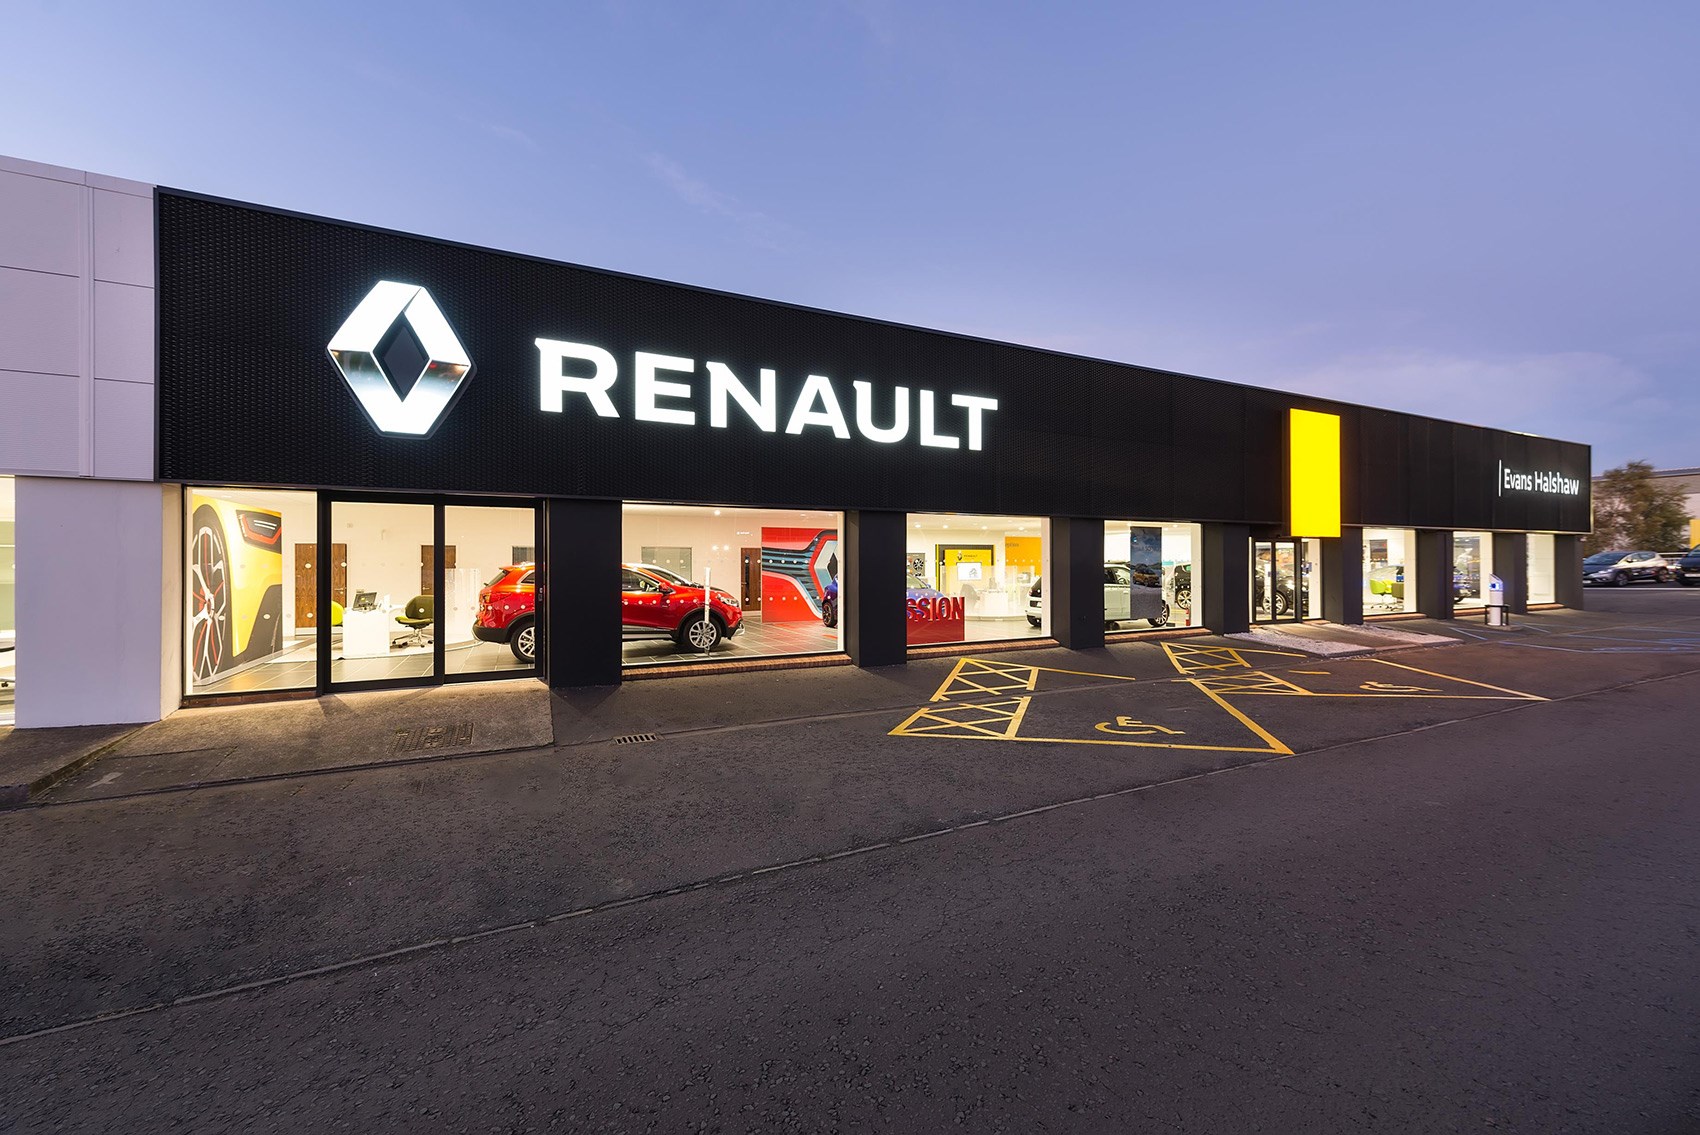 Renault India has announced a price hike for its car models, which will take effect in January 2023.